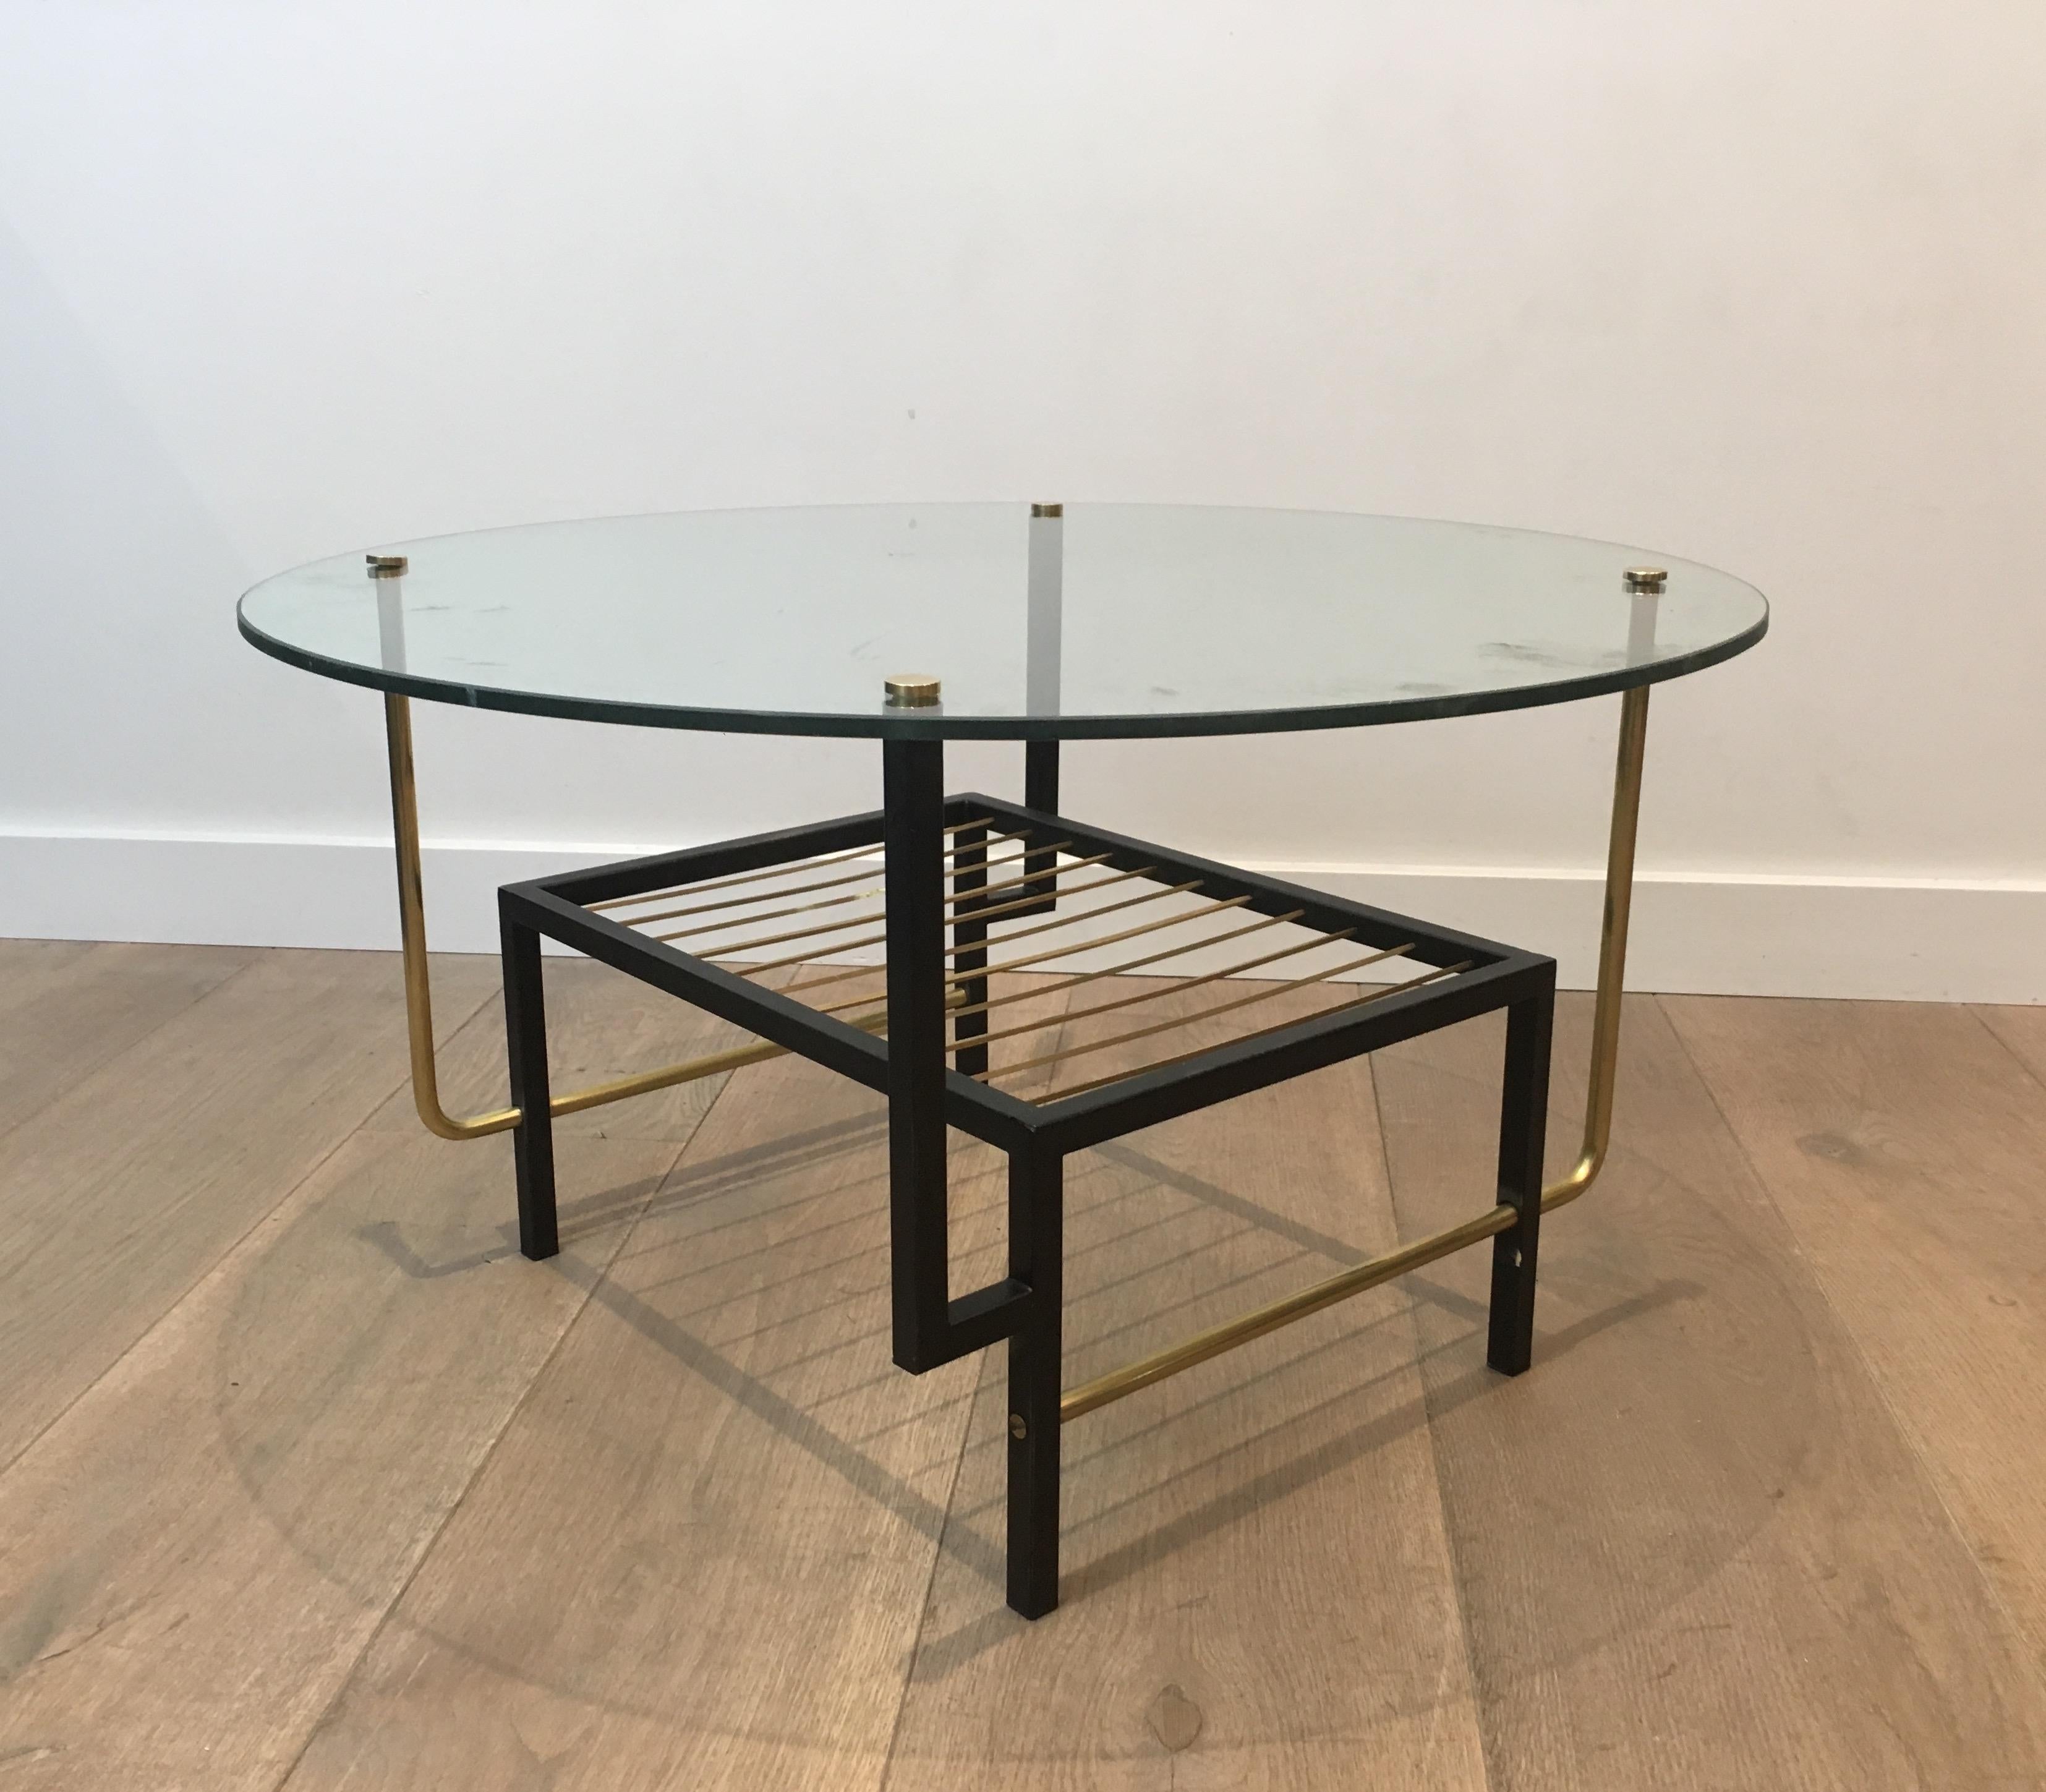 French Attributed to Mathieu Matégot. Rare Black Lacquered and Brass Round Coffee Table For Sale